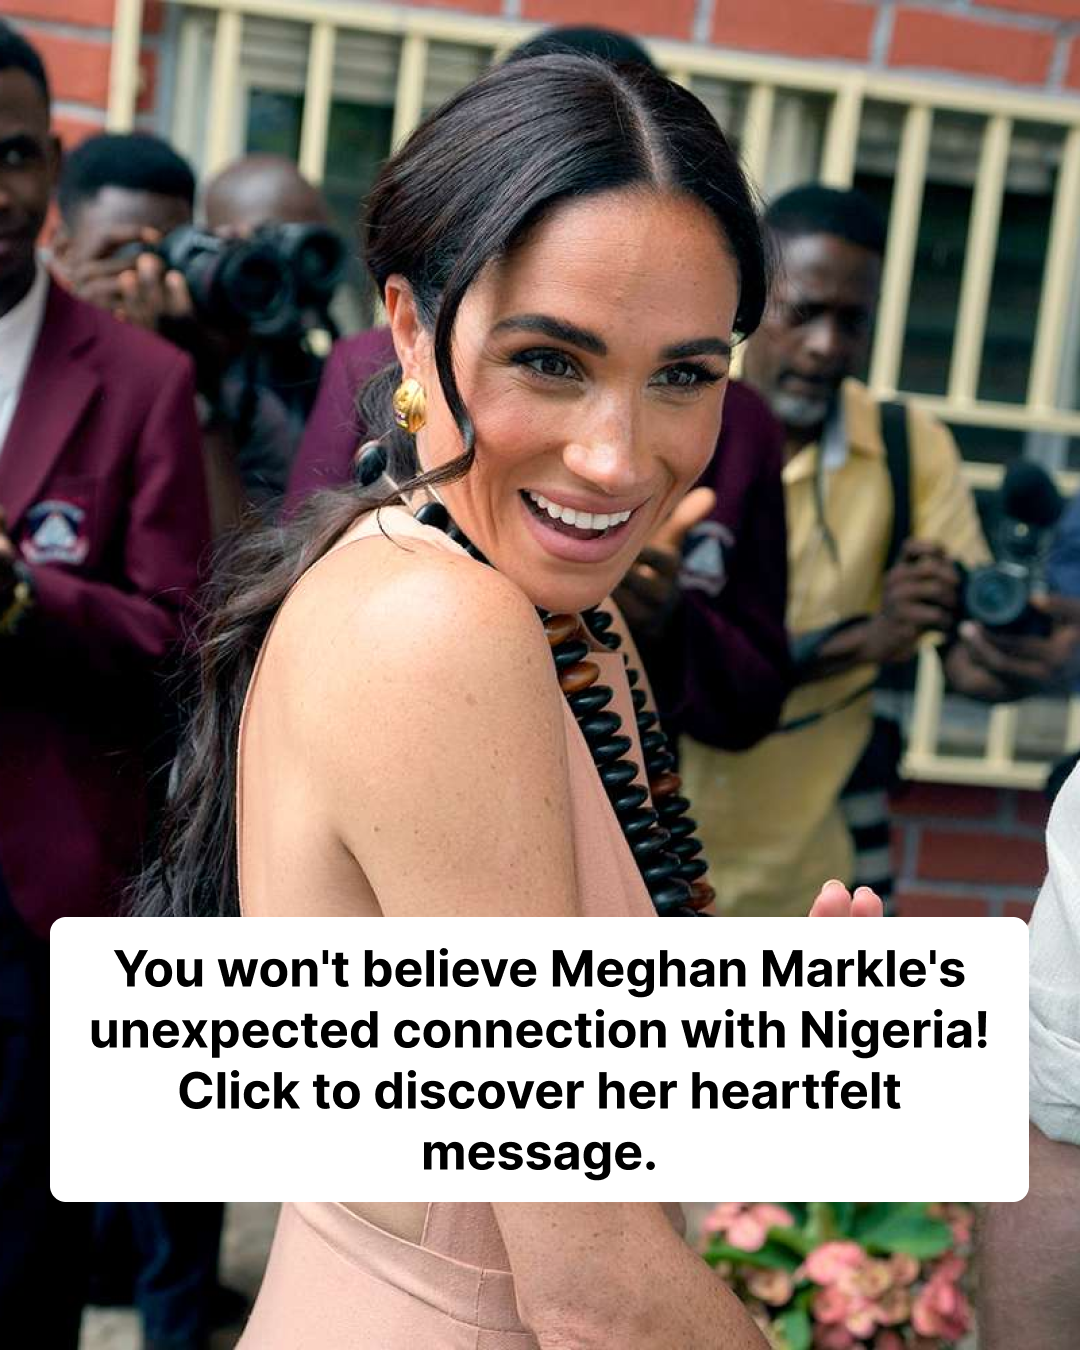 Meghan Markle Thanks Nigeria for ‘Welcoming Me Home’ After Heritage Discovery